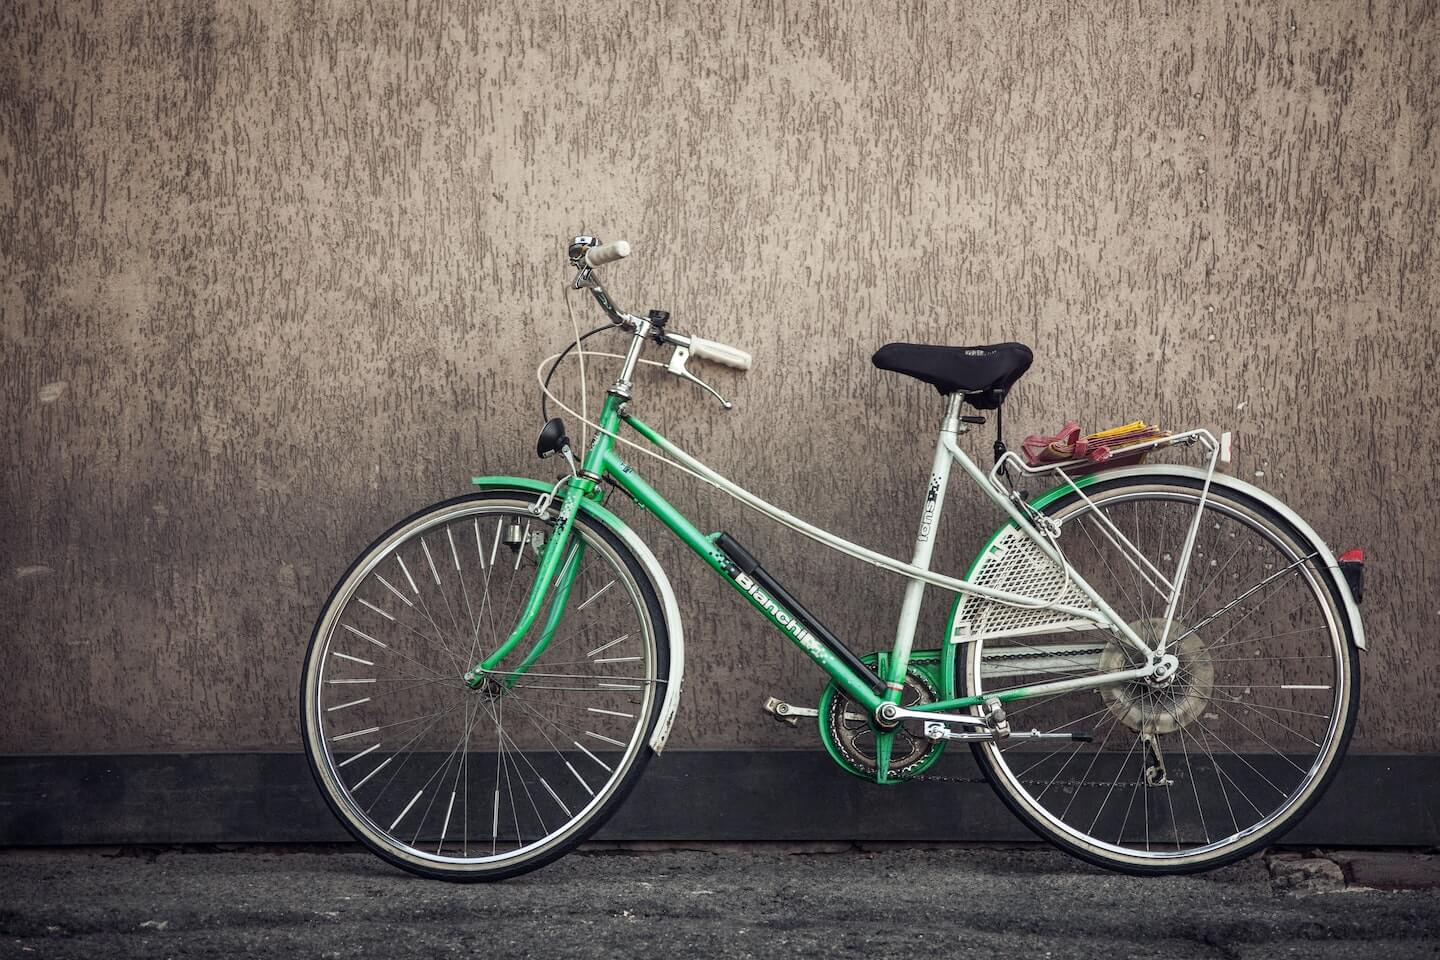 A classic green bicycle